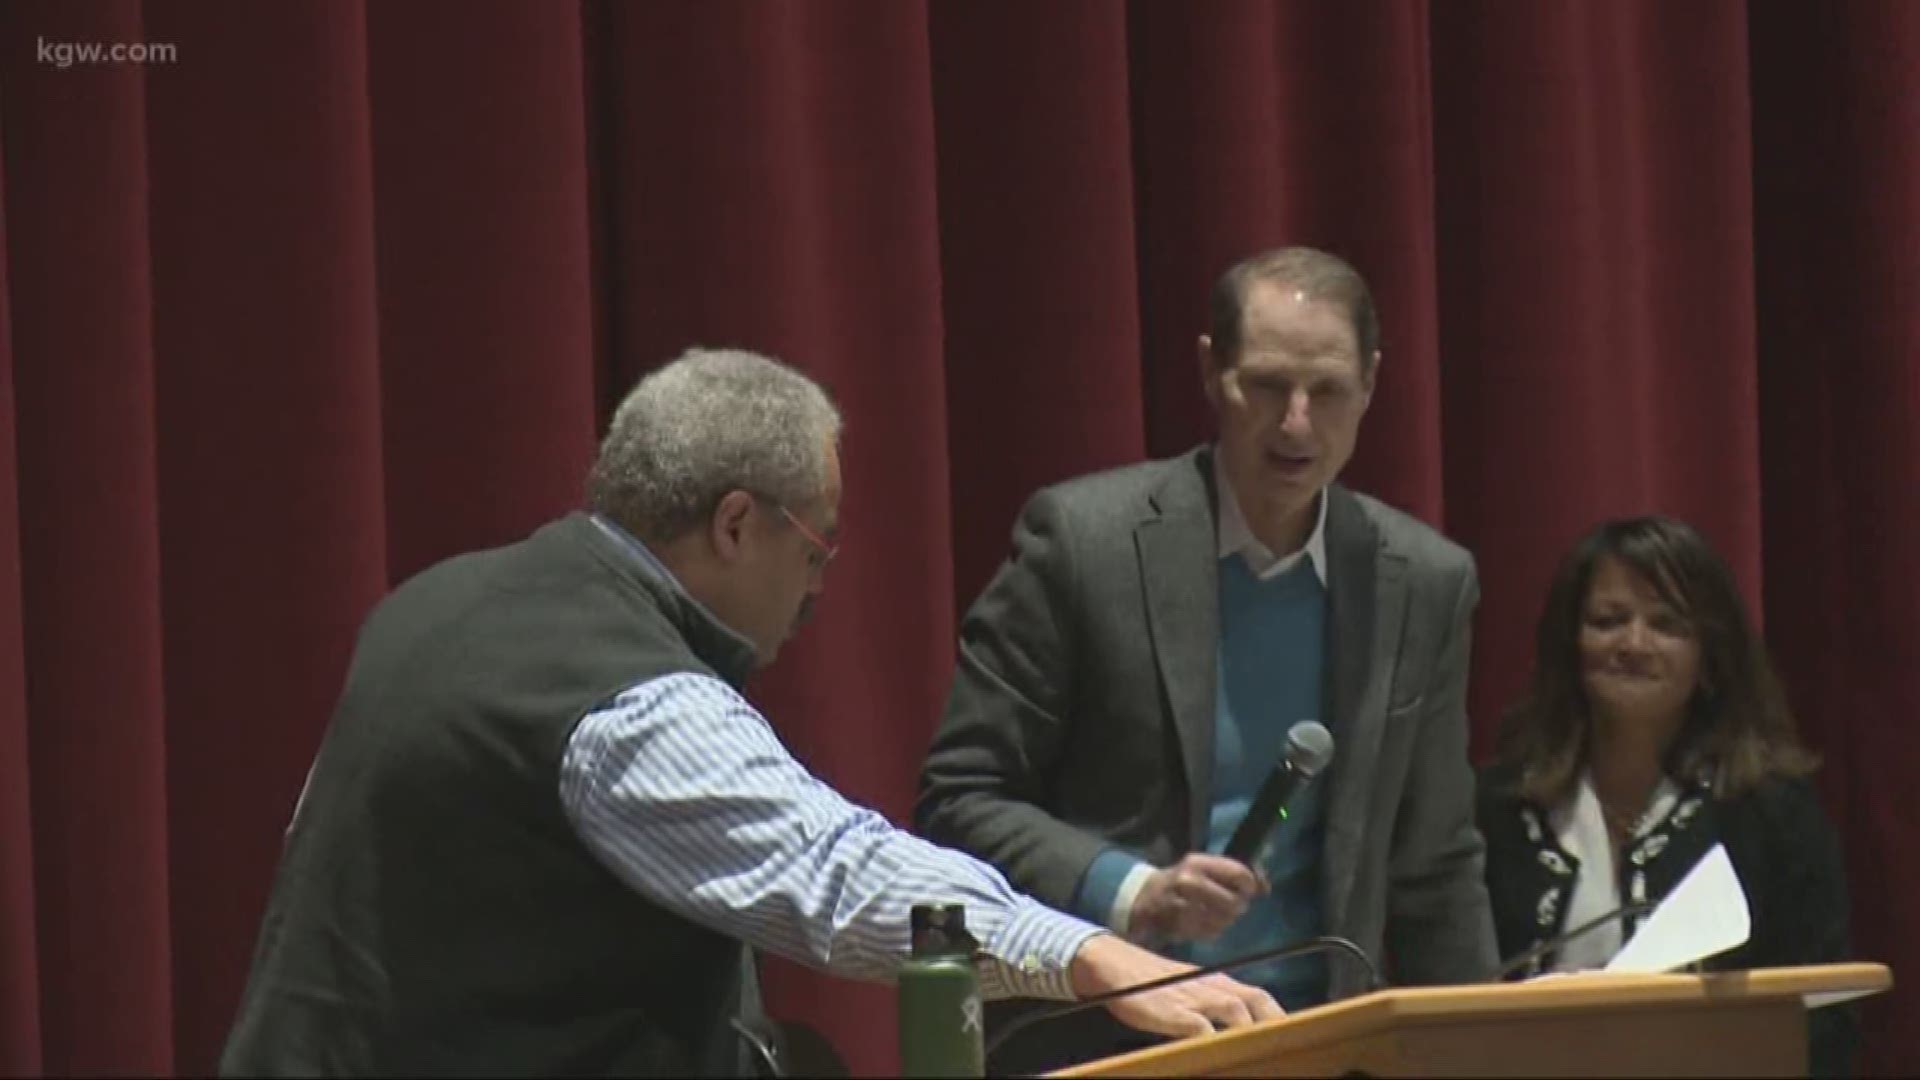 Questions about Iran and what's next came up a lot today at a town hall held by Oregon Sen. Ron Wyden. The senator said it's something Oregonians asked him about at